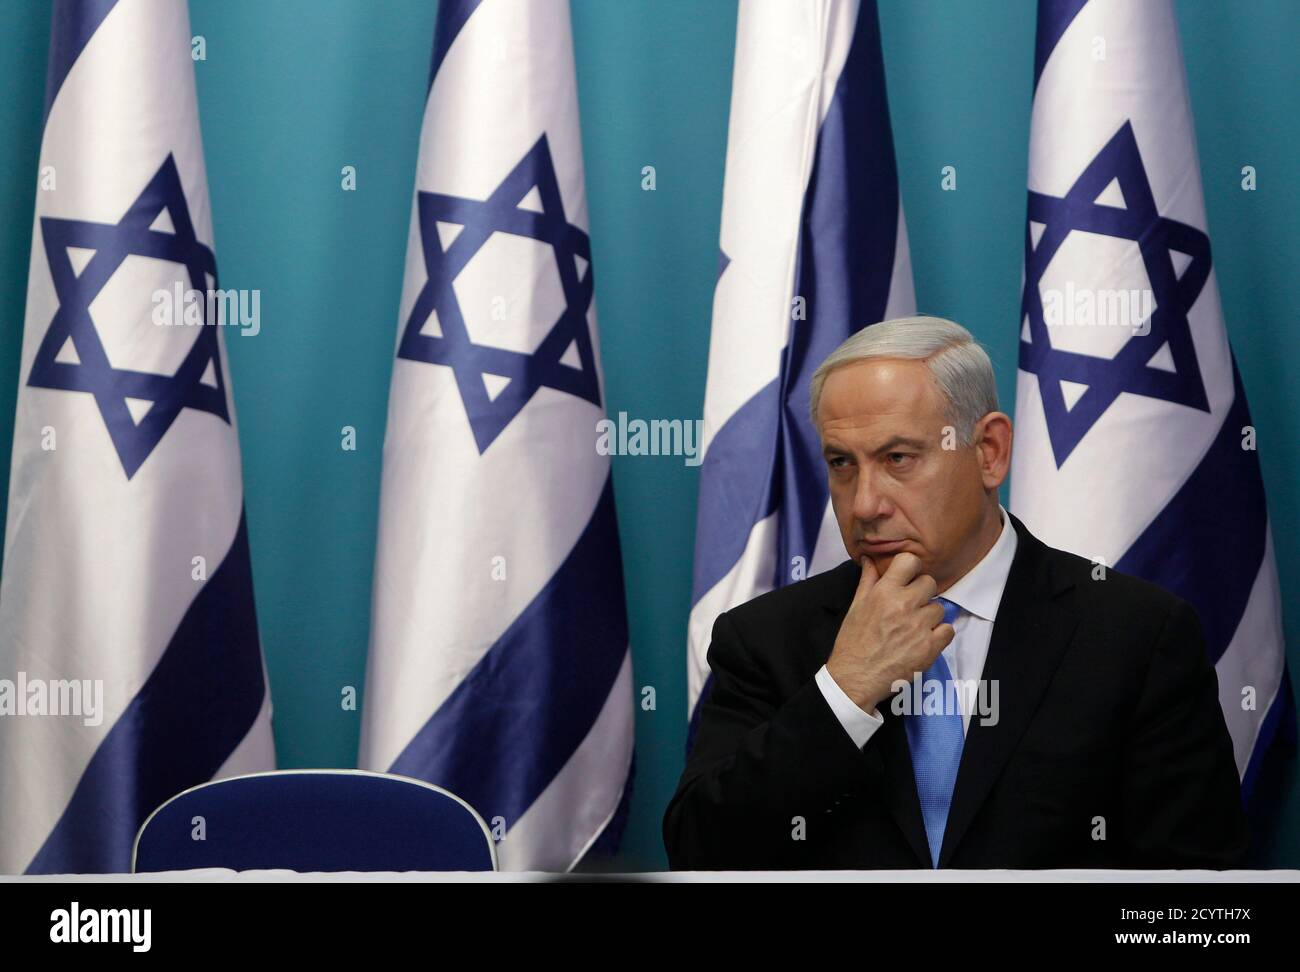 Israel's Prime Minister Benjamin Netanyahu sits after delivering a statement in Jerusalem November 21, 2012. Netanyahu hinted on Wednesday that if an Egyptian-brokered truce with Islamist militants in Gaza did not work Israel would consider 'more severe military action' against the Palestinian territory. REUTERS/Baz Ratner (JERUSALEM - Tags: POLITICS CONFLICT) Stock Photo